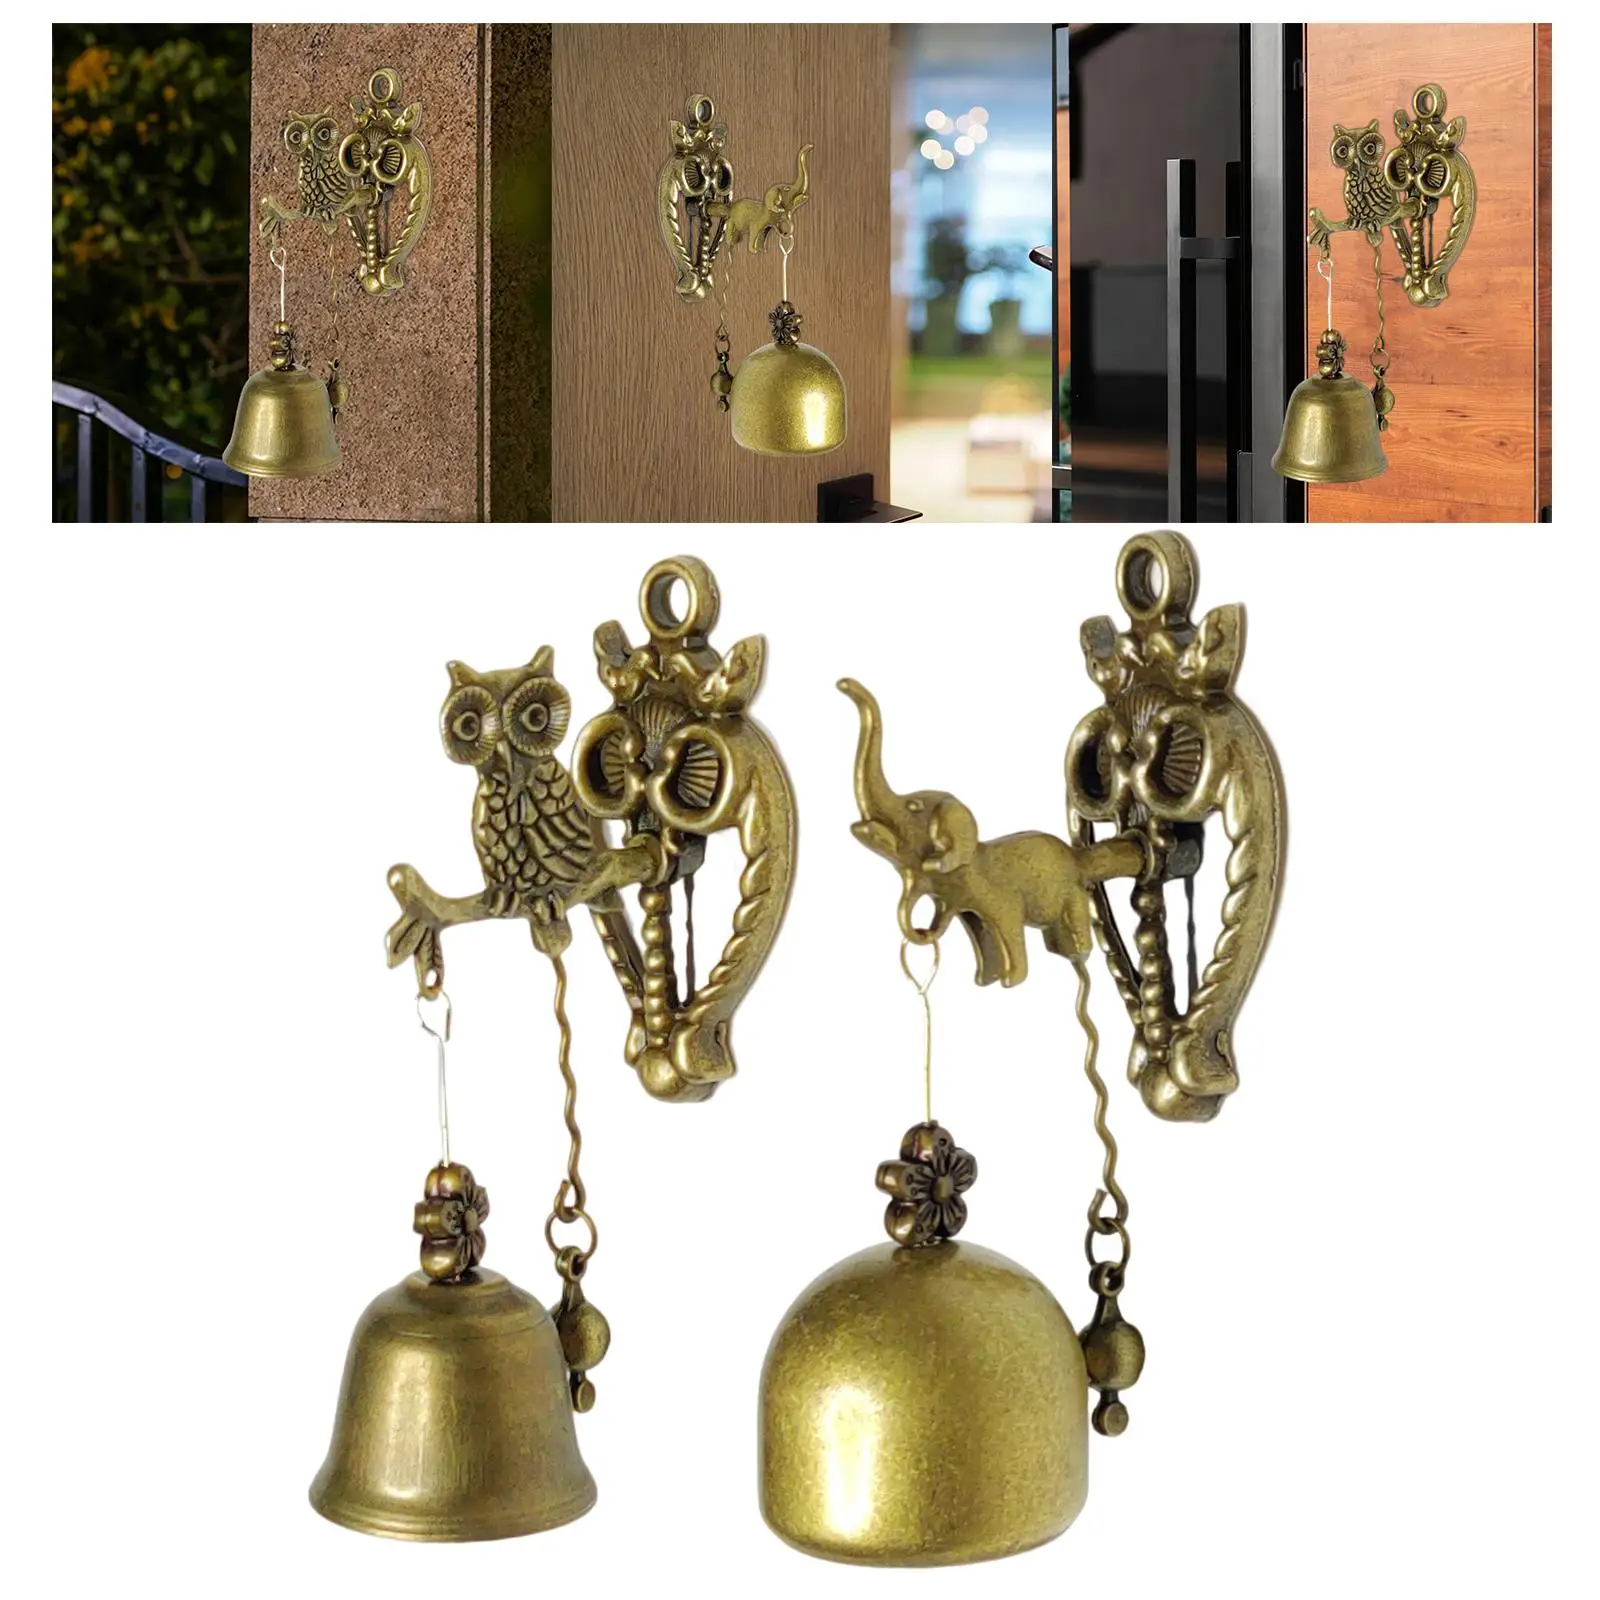 Antique Style Shopkeepers Door Bell Figure Classic Style Entry Door Chime for Cafe Farmhouse Anniversary Restaurant Villa